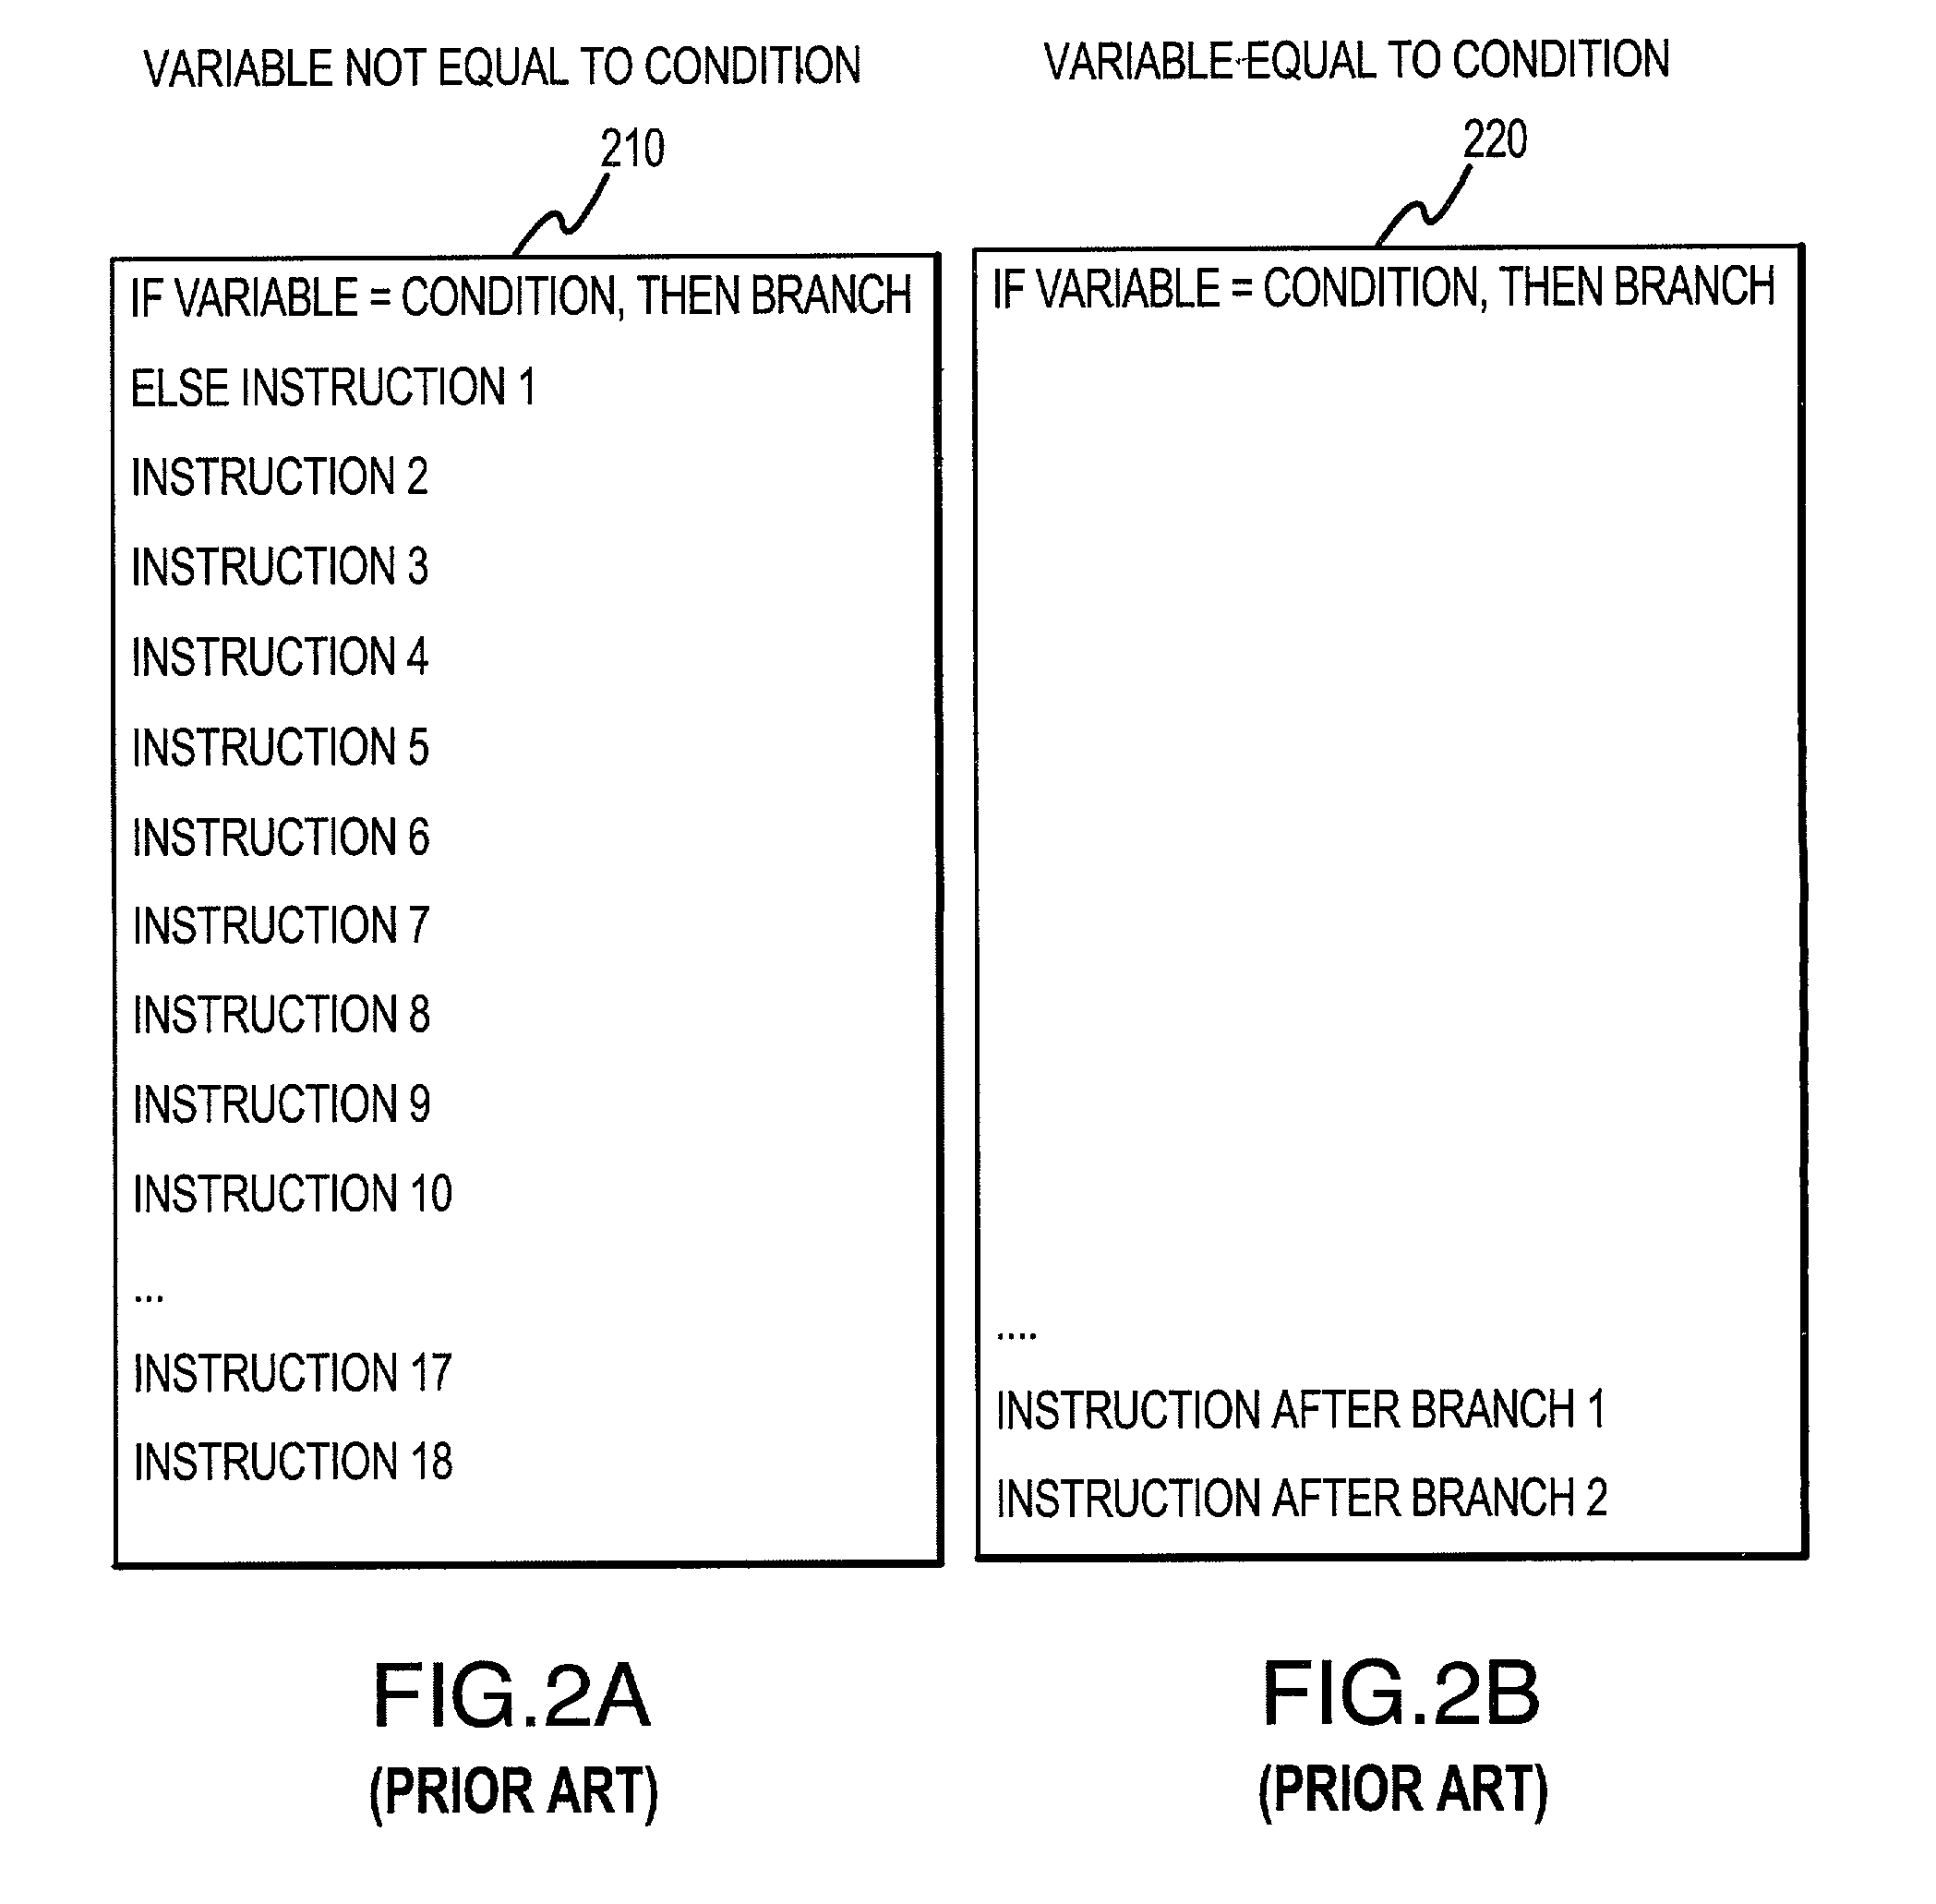 Method and system for generating object code to facilitate predictive memory retrieval